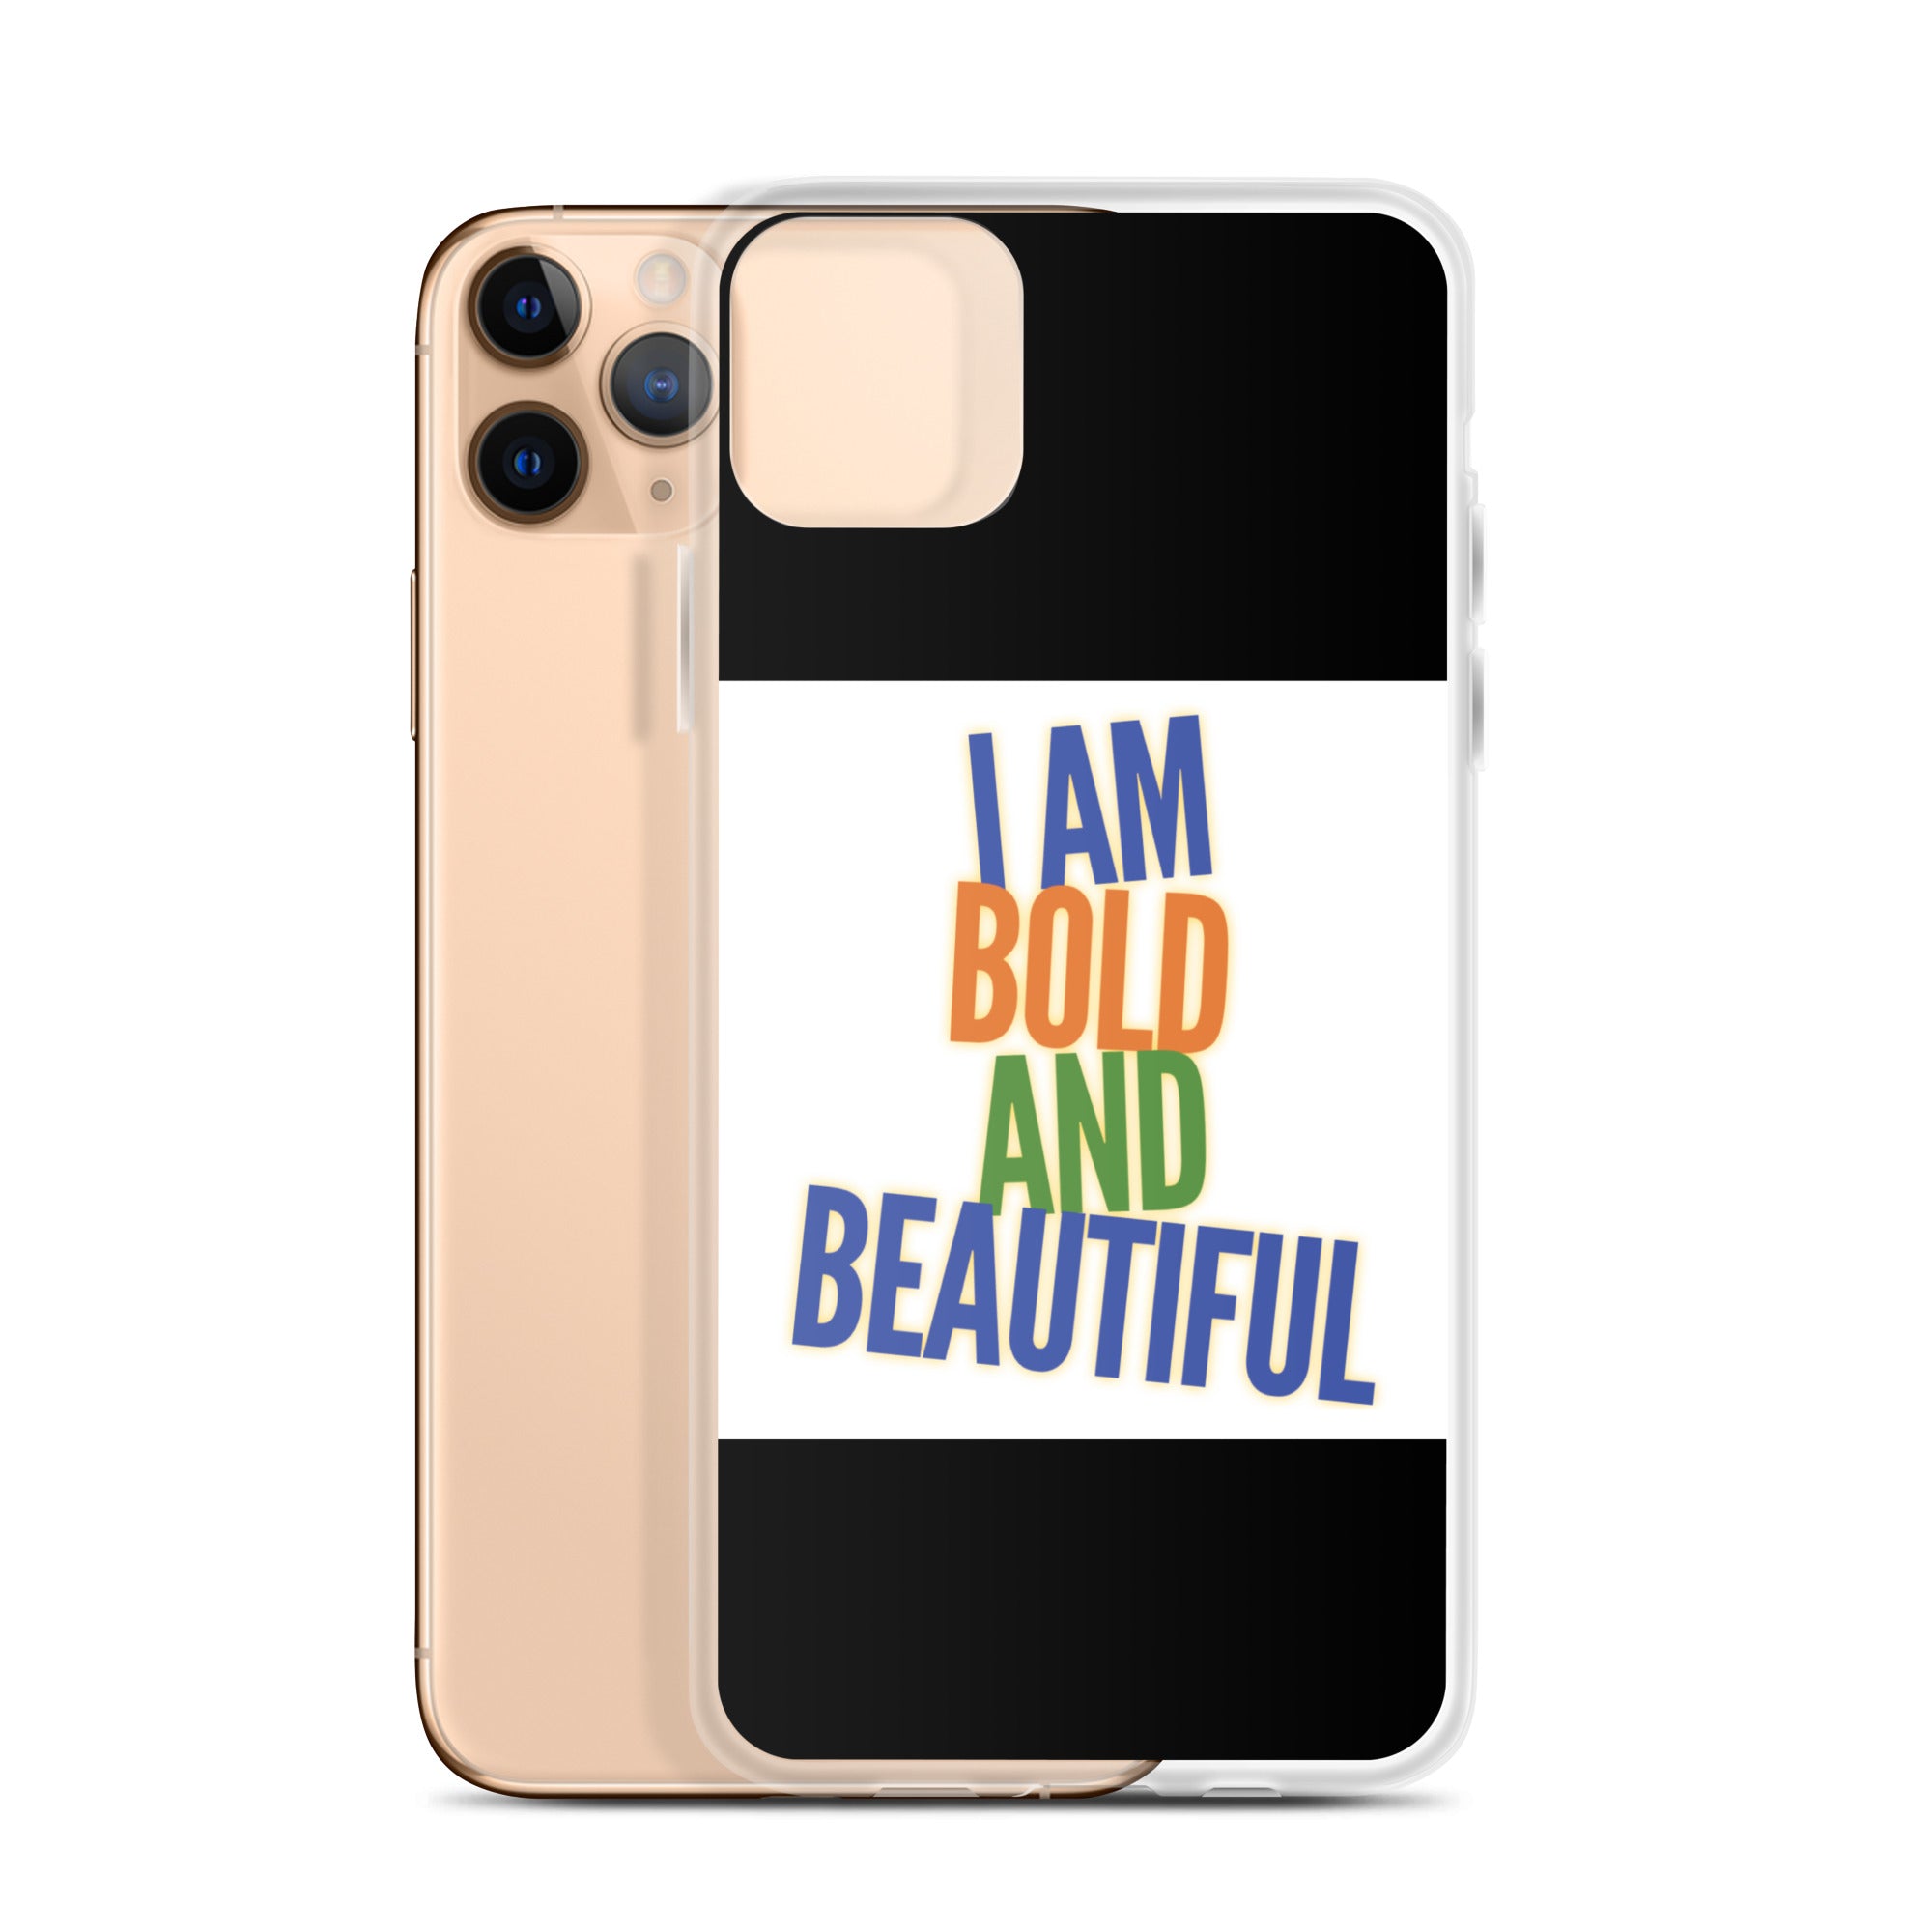 GloWell Designs - iPhone Case - Affirmation Quote - I Am Bold and Beautiful - GloWell Designs